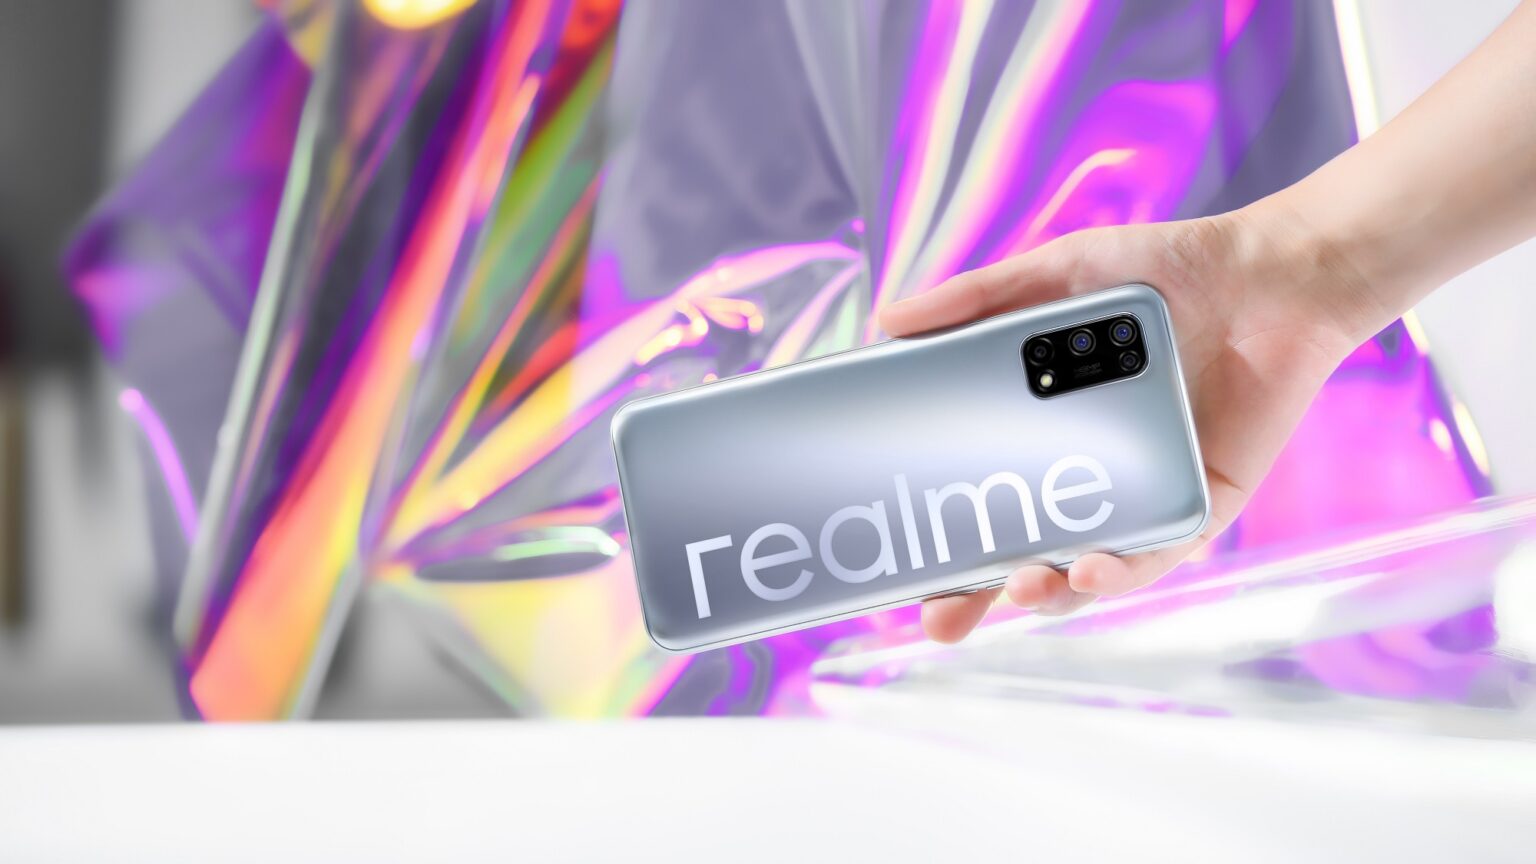 realme Launched Its Latest 5G Smartphone, Realme 7 5G For Everyone